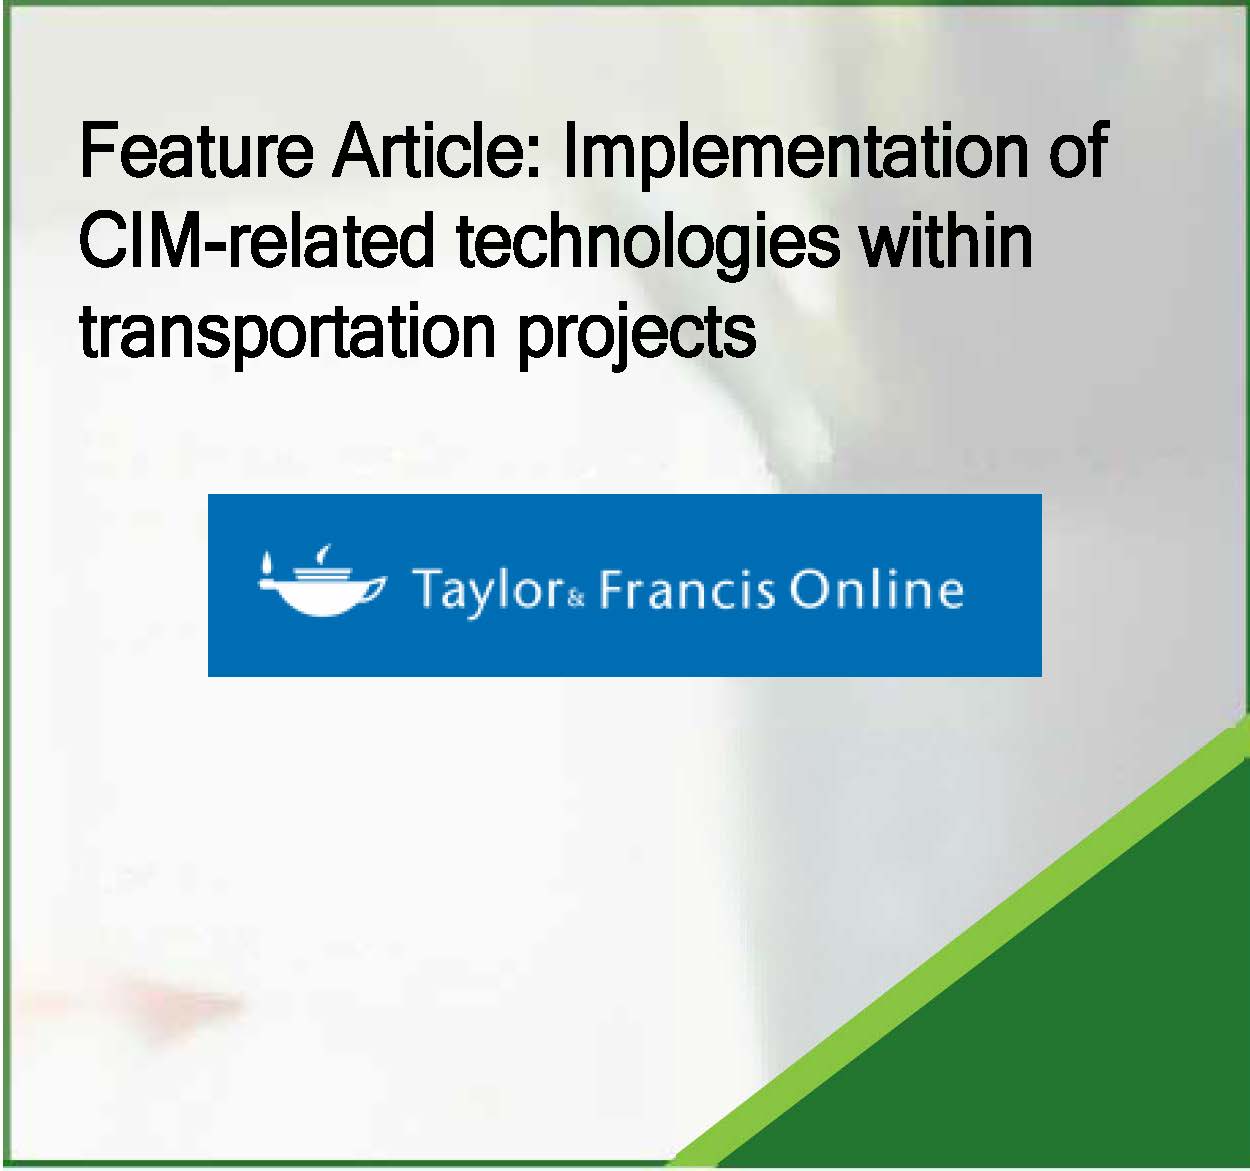 Feature Article: Implementation of CIM-related technologies within transportation projects